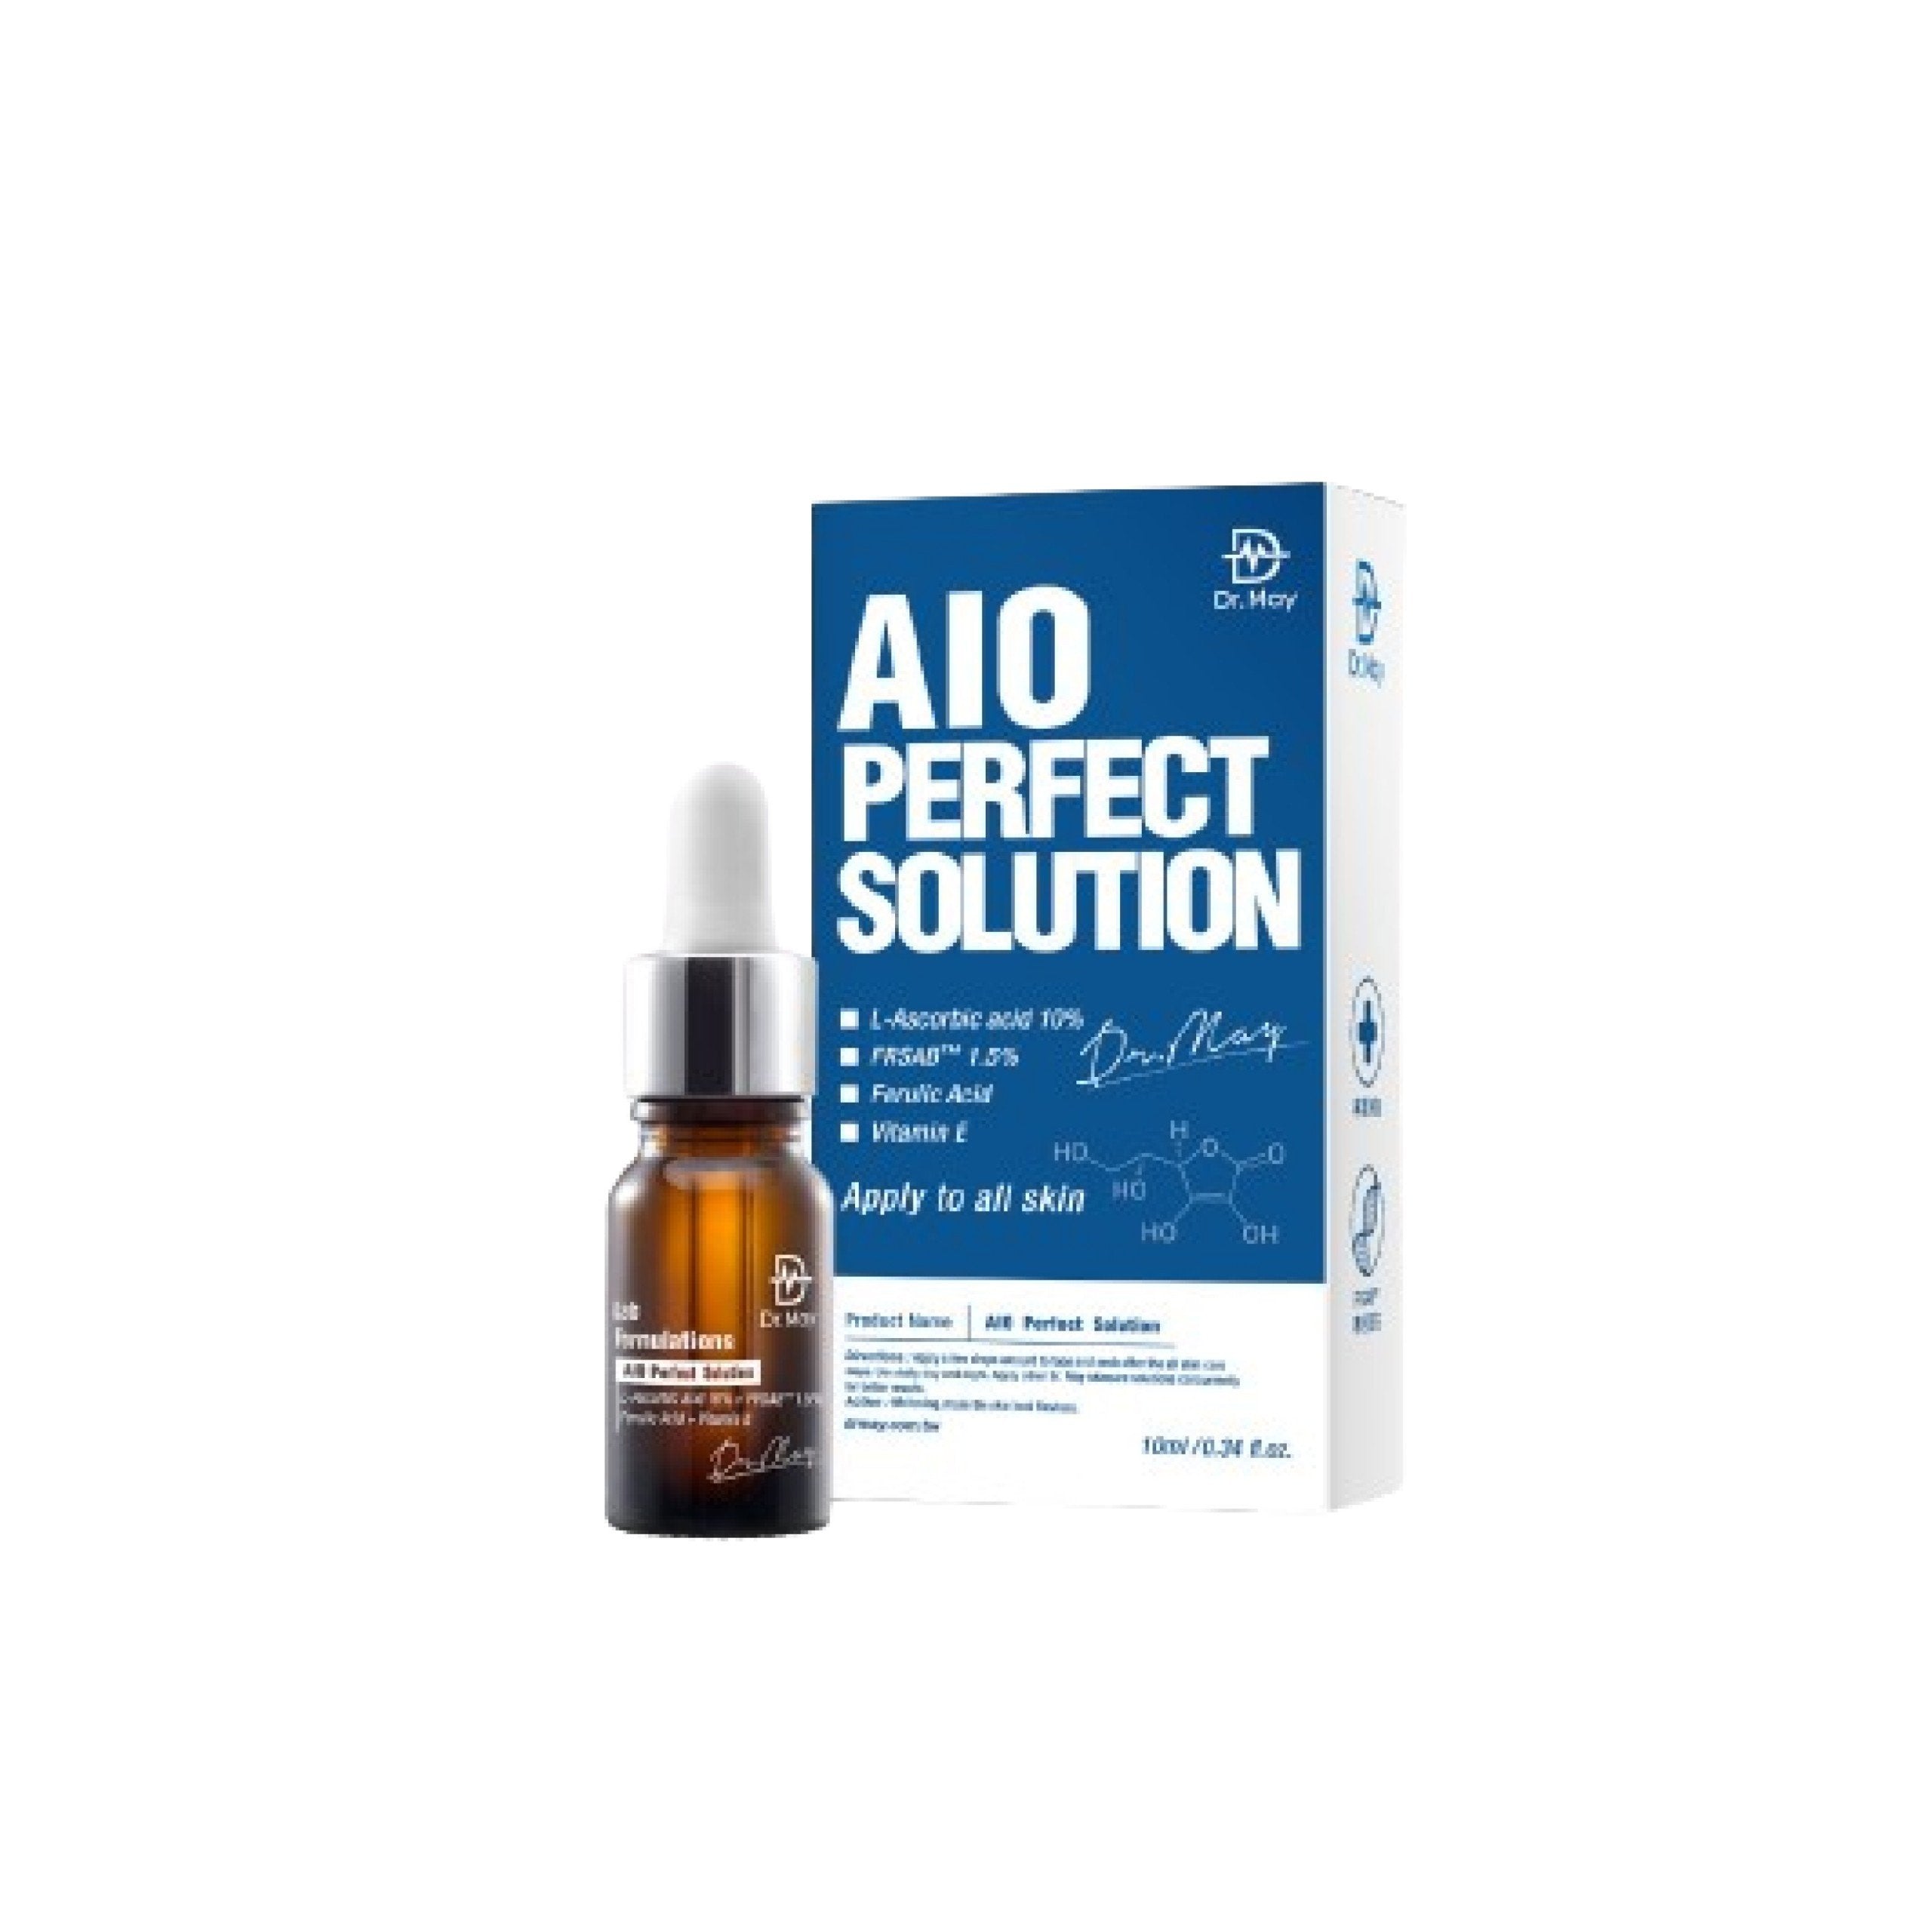 Dr.May Aio Essence Helps Whiten Skin and Supports Dark Spots - Dr. May Aio Perfect Solution 10ml